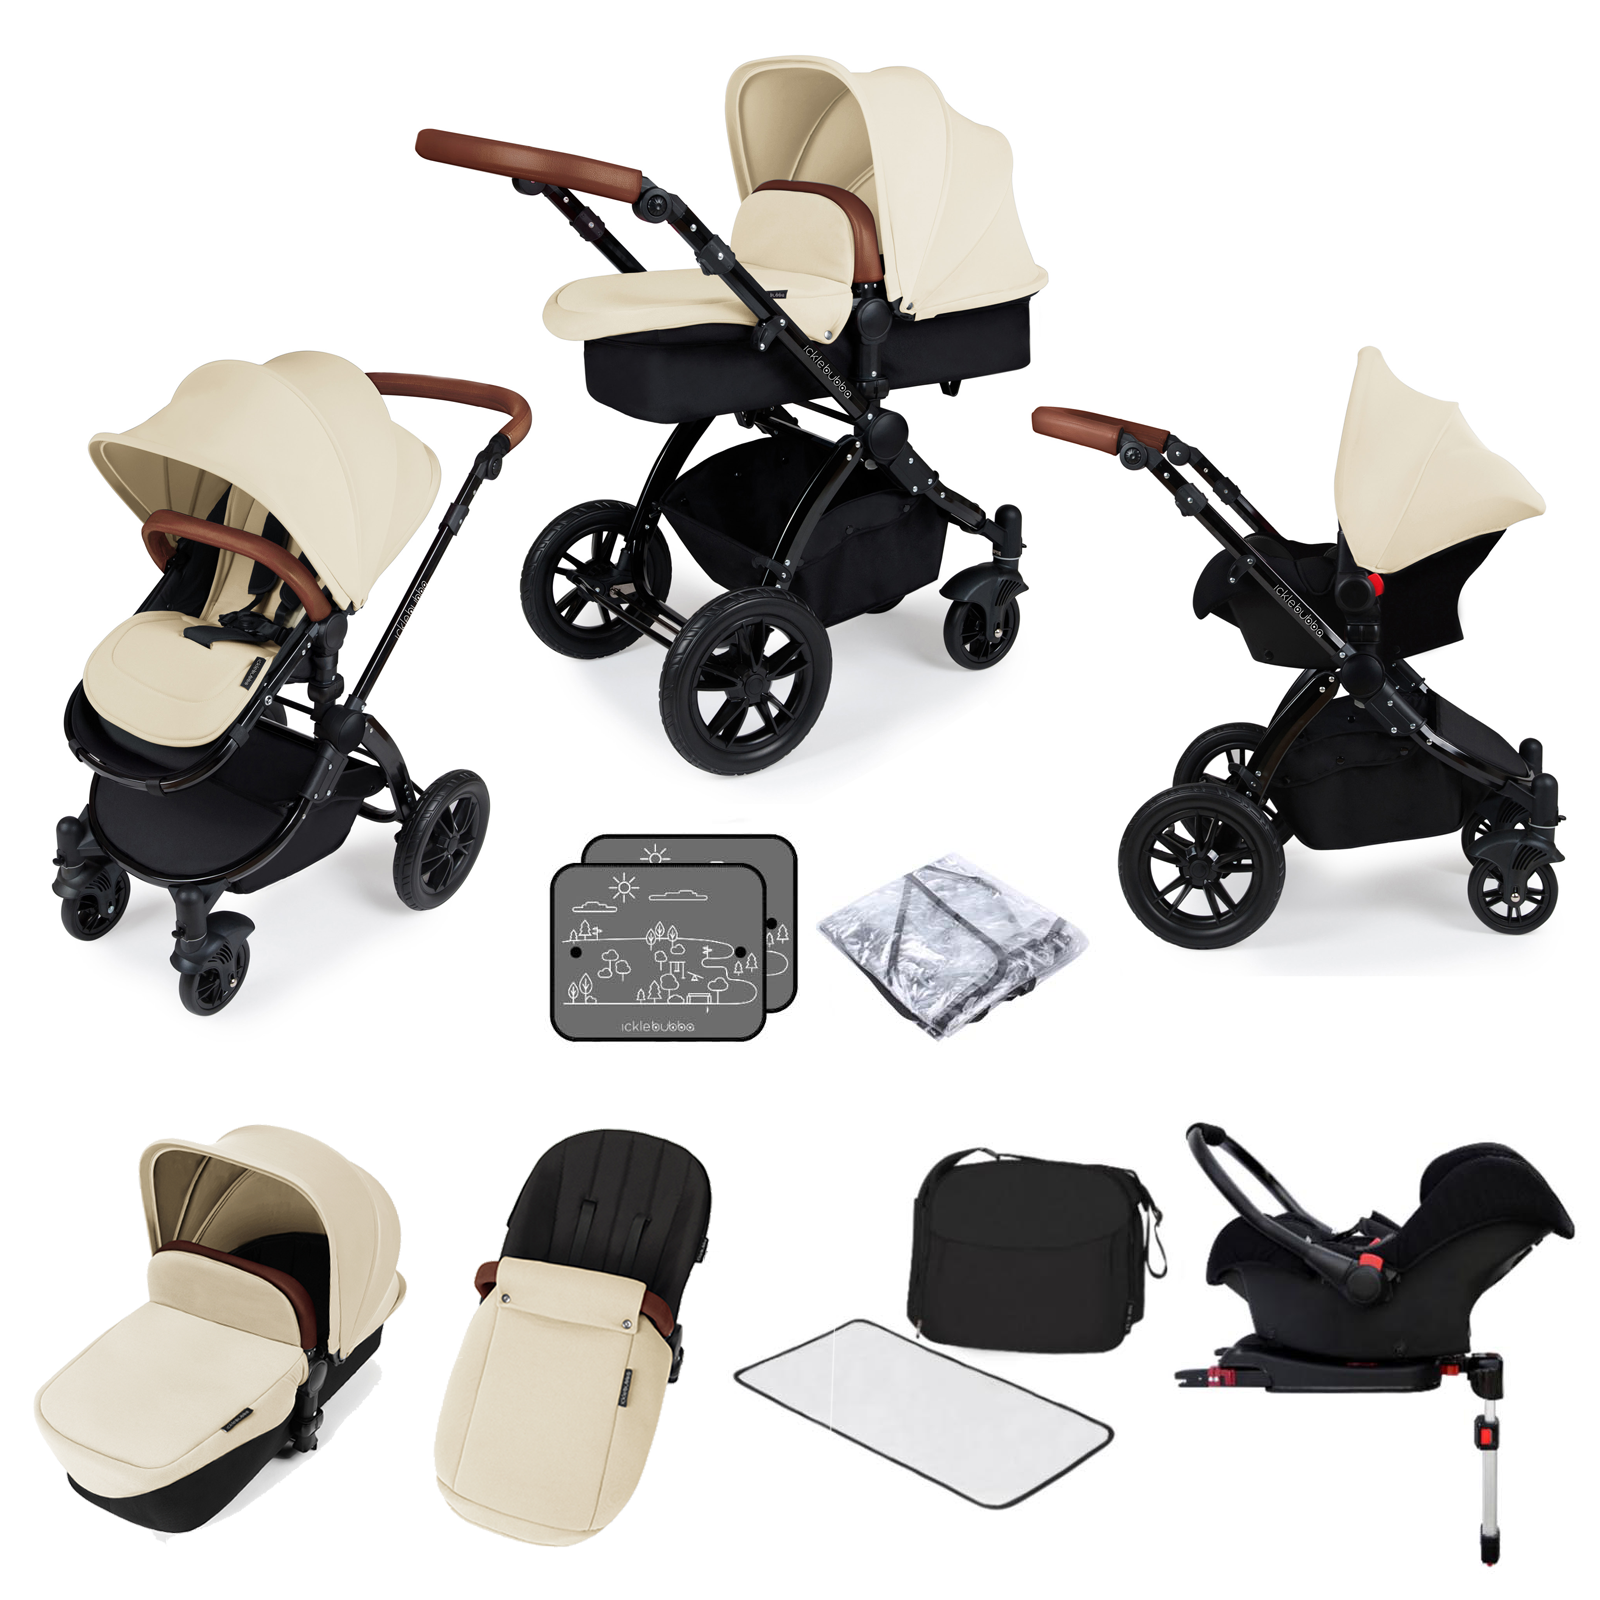 Ickle bubba Stomp V3 Black All In One (Galaxy) 11pc Travel System & Isofix Base - Sand...